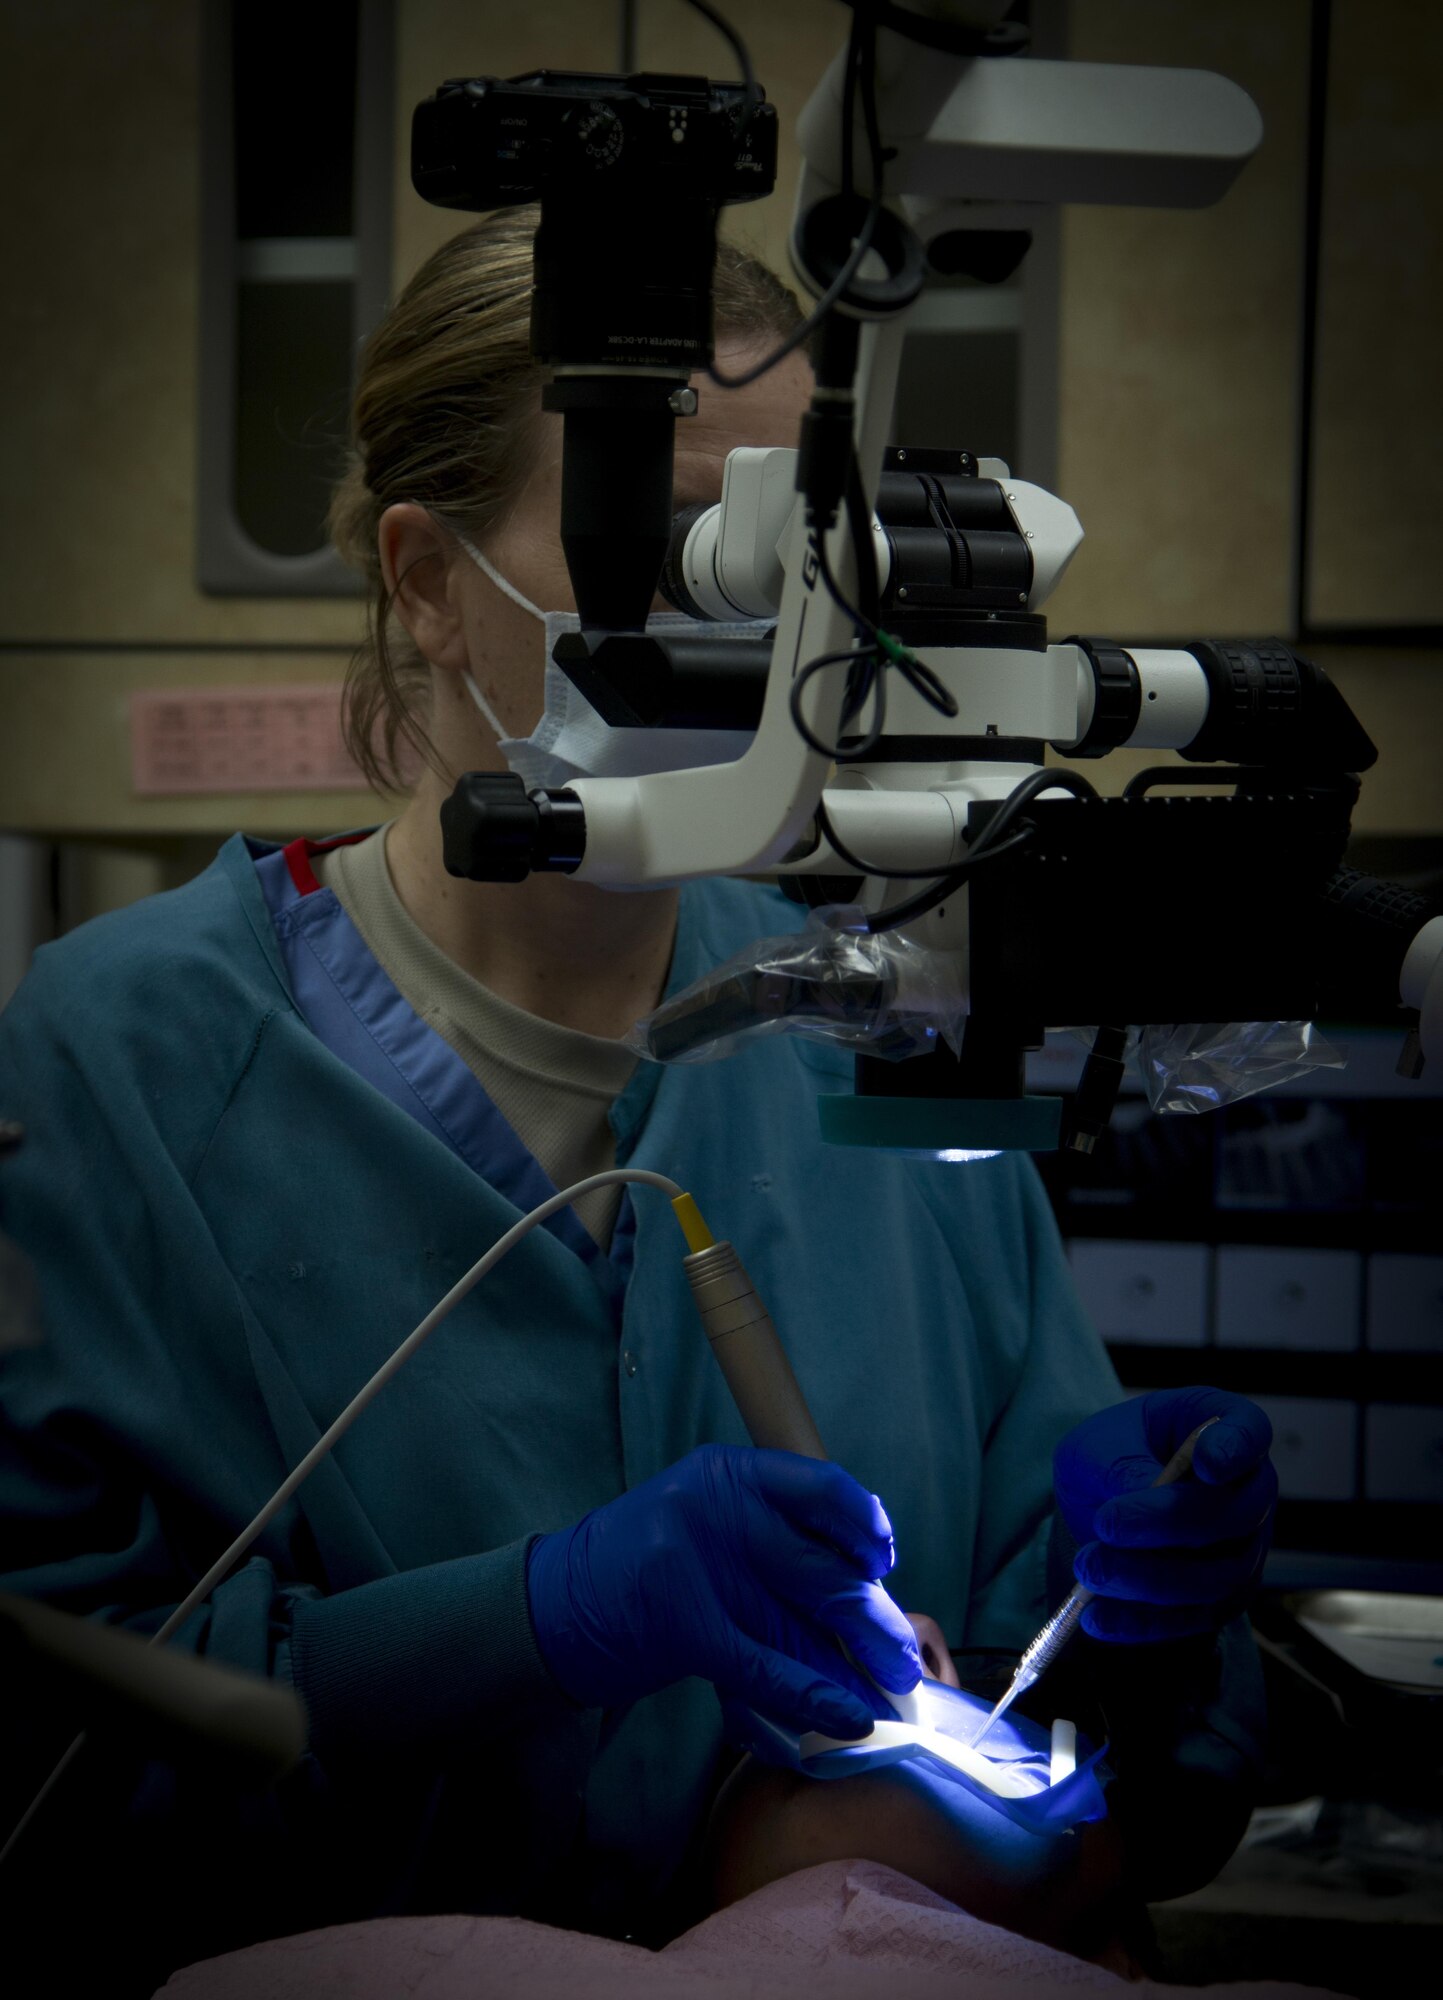 U.S. Air Force Maj. Kelly Ramey, an endodontist assigned to the 6th Dental Squadron, works on a root canal at MacDill Air Force Base, Florida, July 11, 2017. Ramey found her passion for dentistry after visiting a dental clinic during a tour. (U.S. Air Force photo by Senior Airman Mariette Adams)